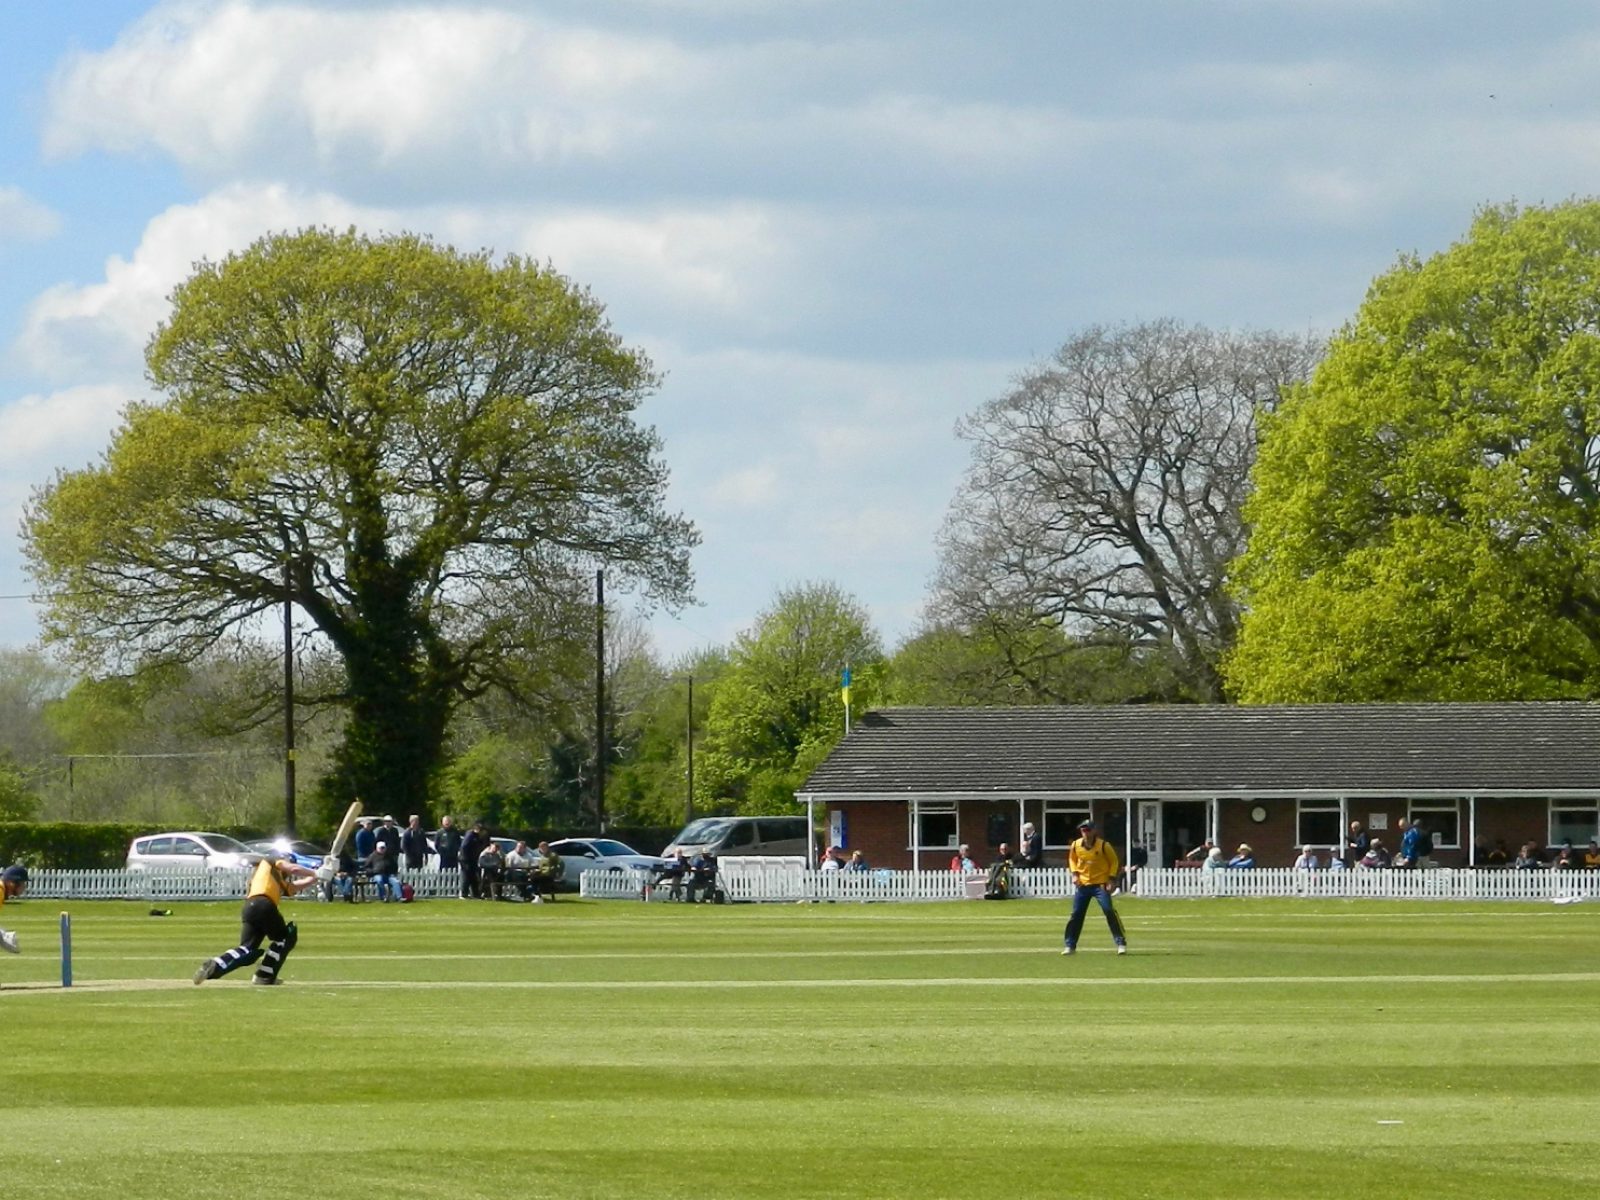 Whitchurch-Cricket-Club-scaled